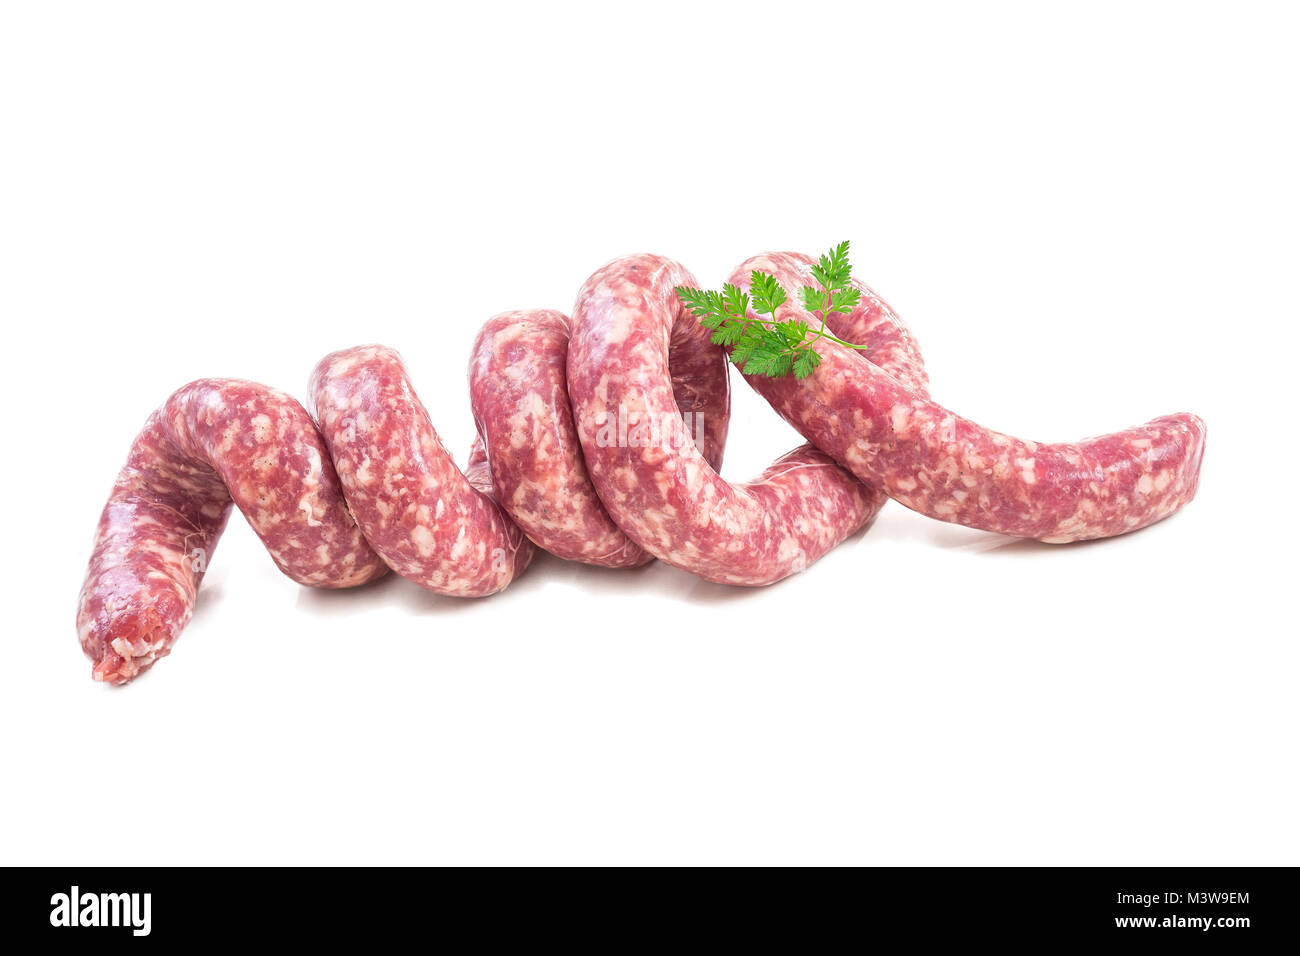 Toulouse sausage Raw 'saucisse de toulouse' twisted f,rench meat specialty from Toulouse on white Stock Photo